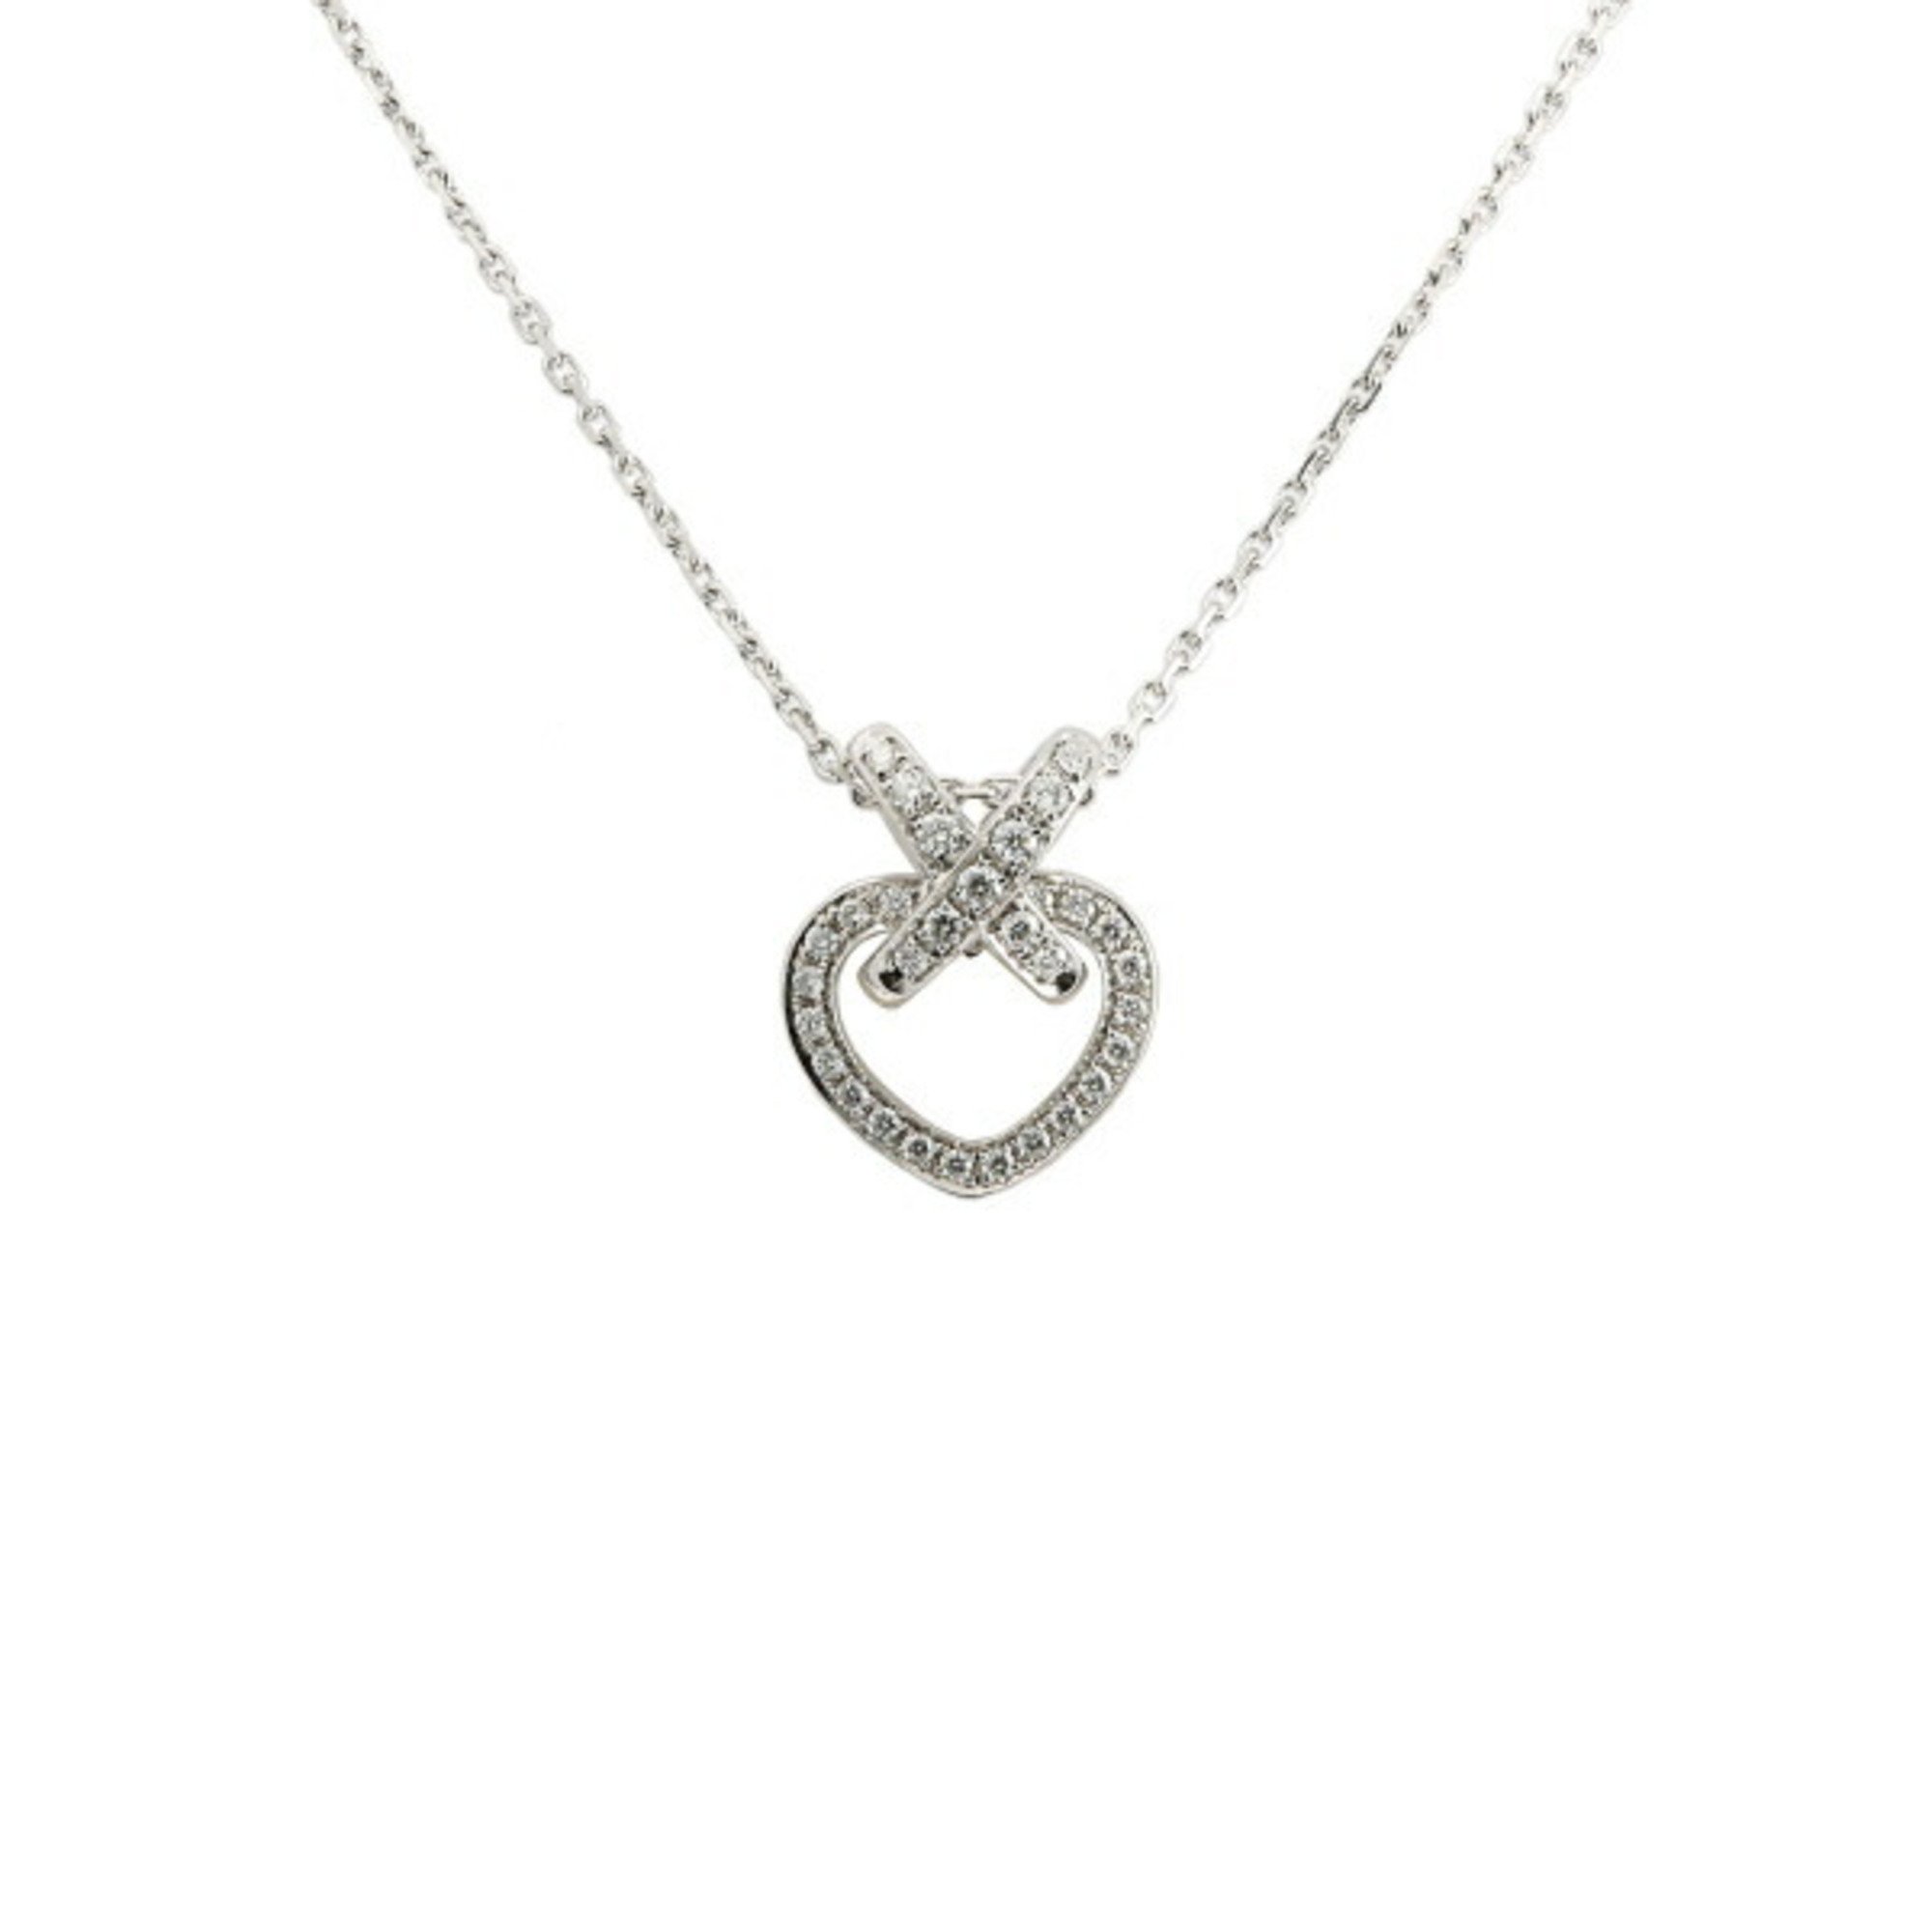 Chaumet Chaumerian K18WG white gold necklace